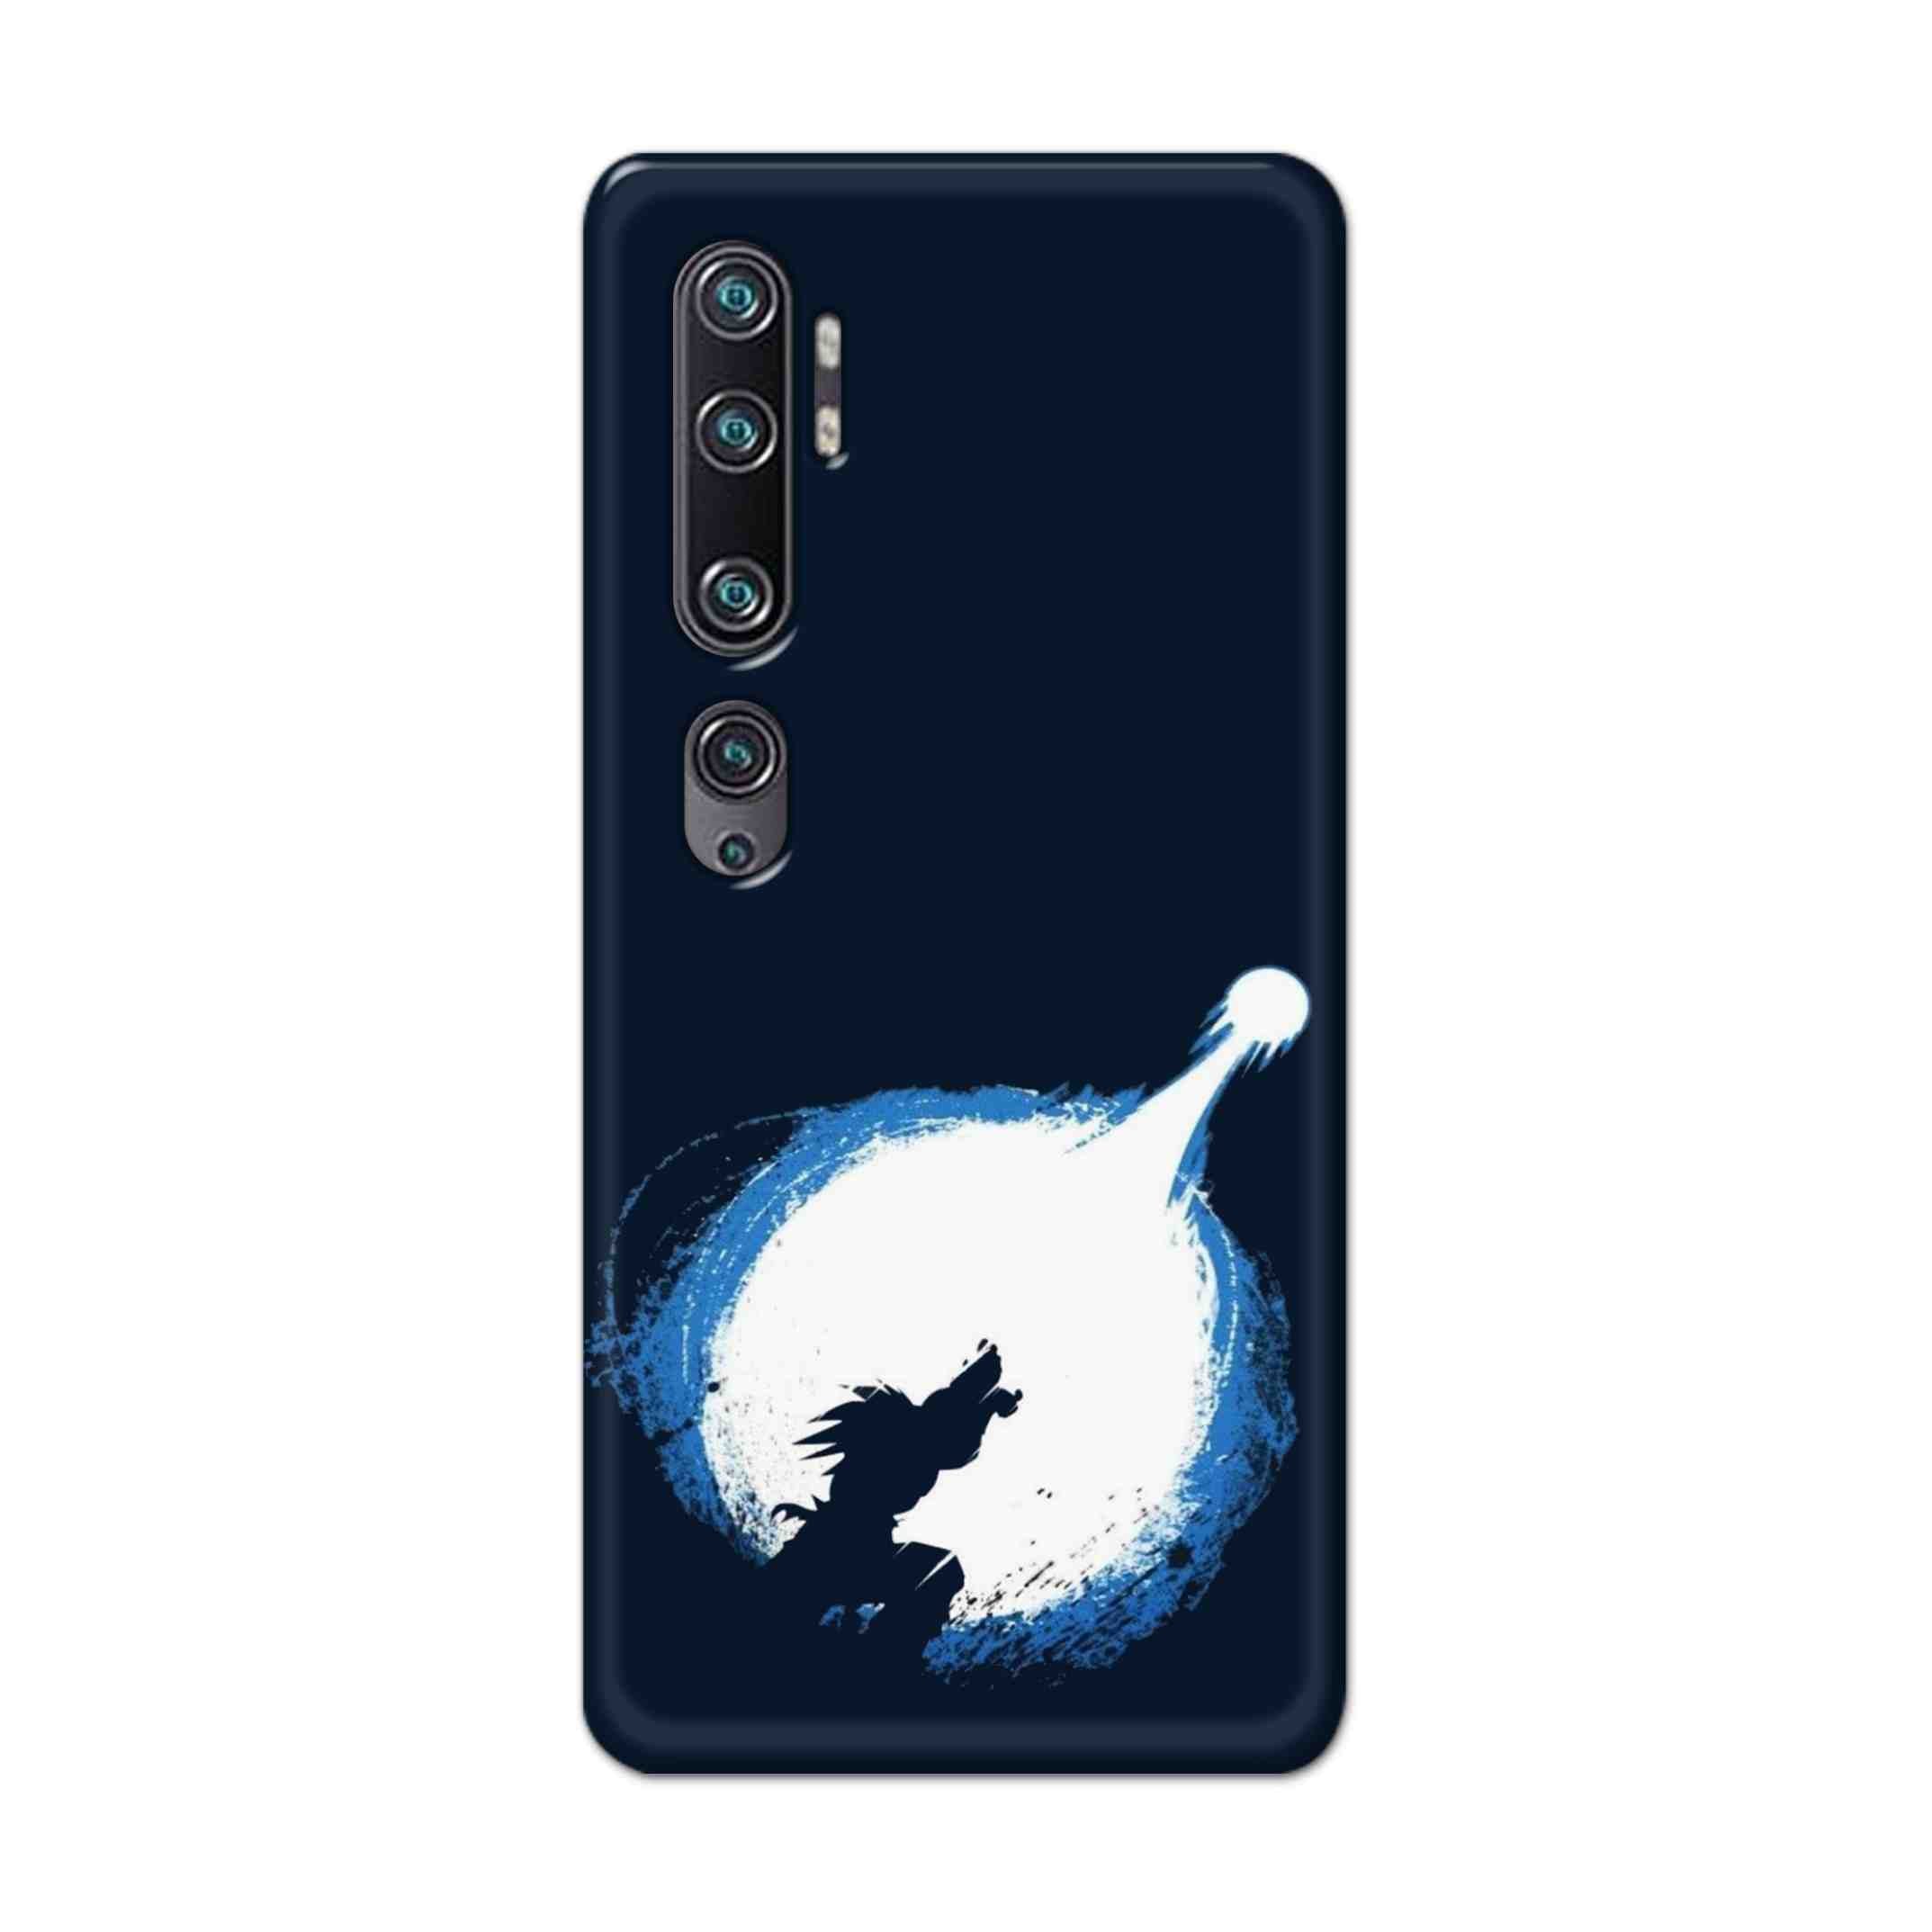 Buy Goku Power Hard Back Mobile Phone Case Cover For Xiaomi Mi Note 10 Online